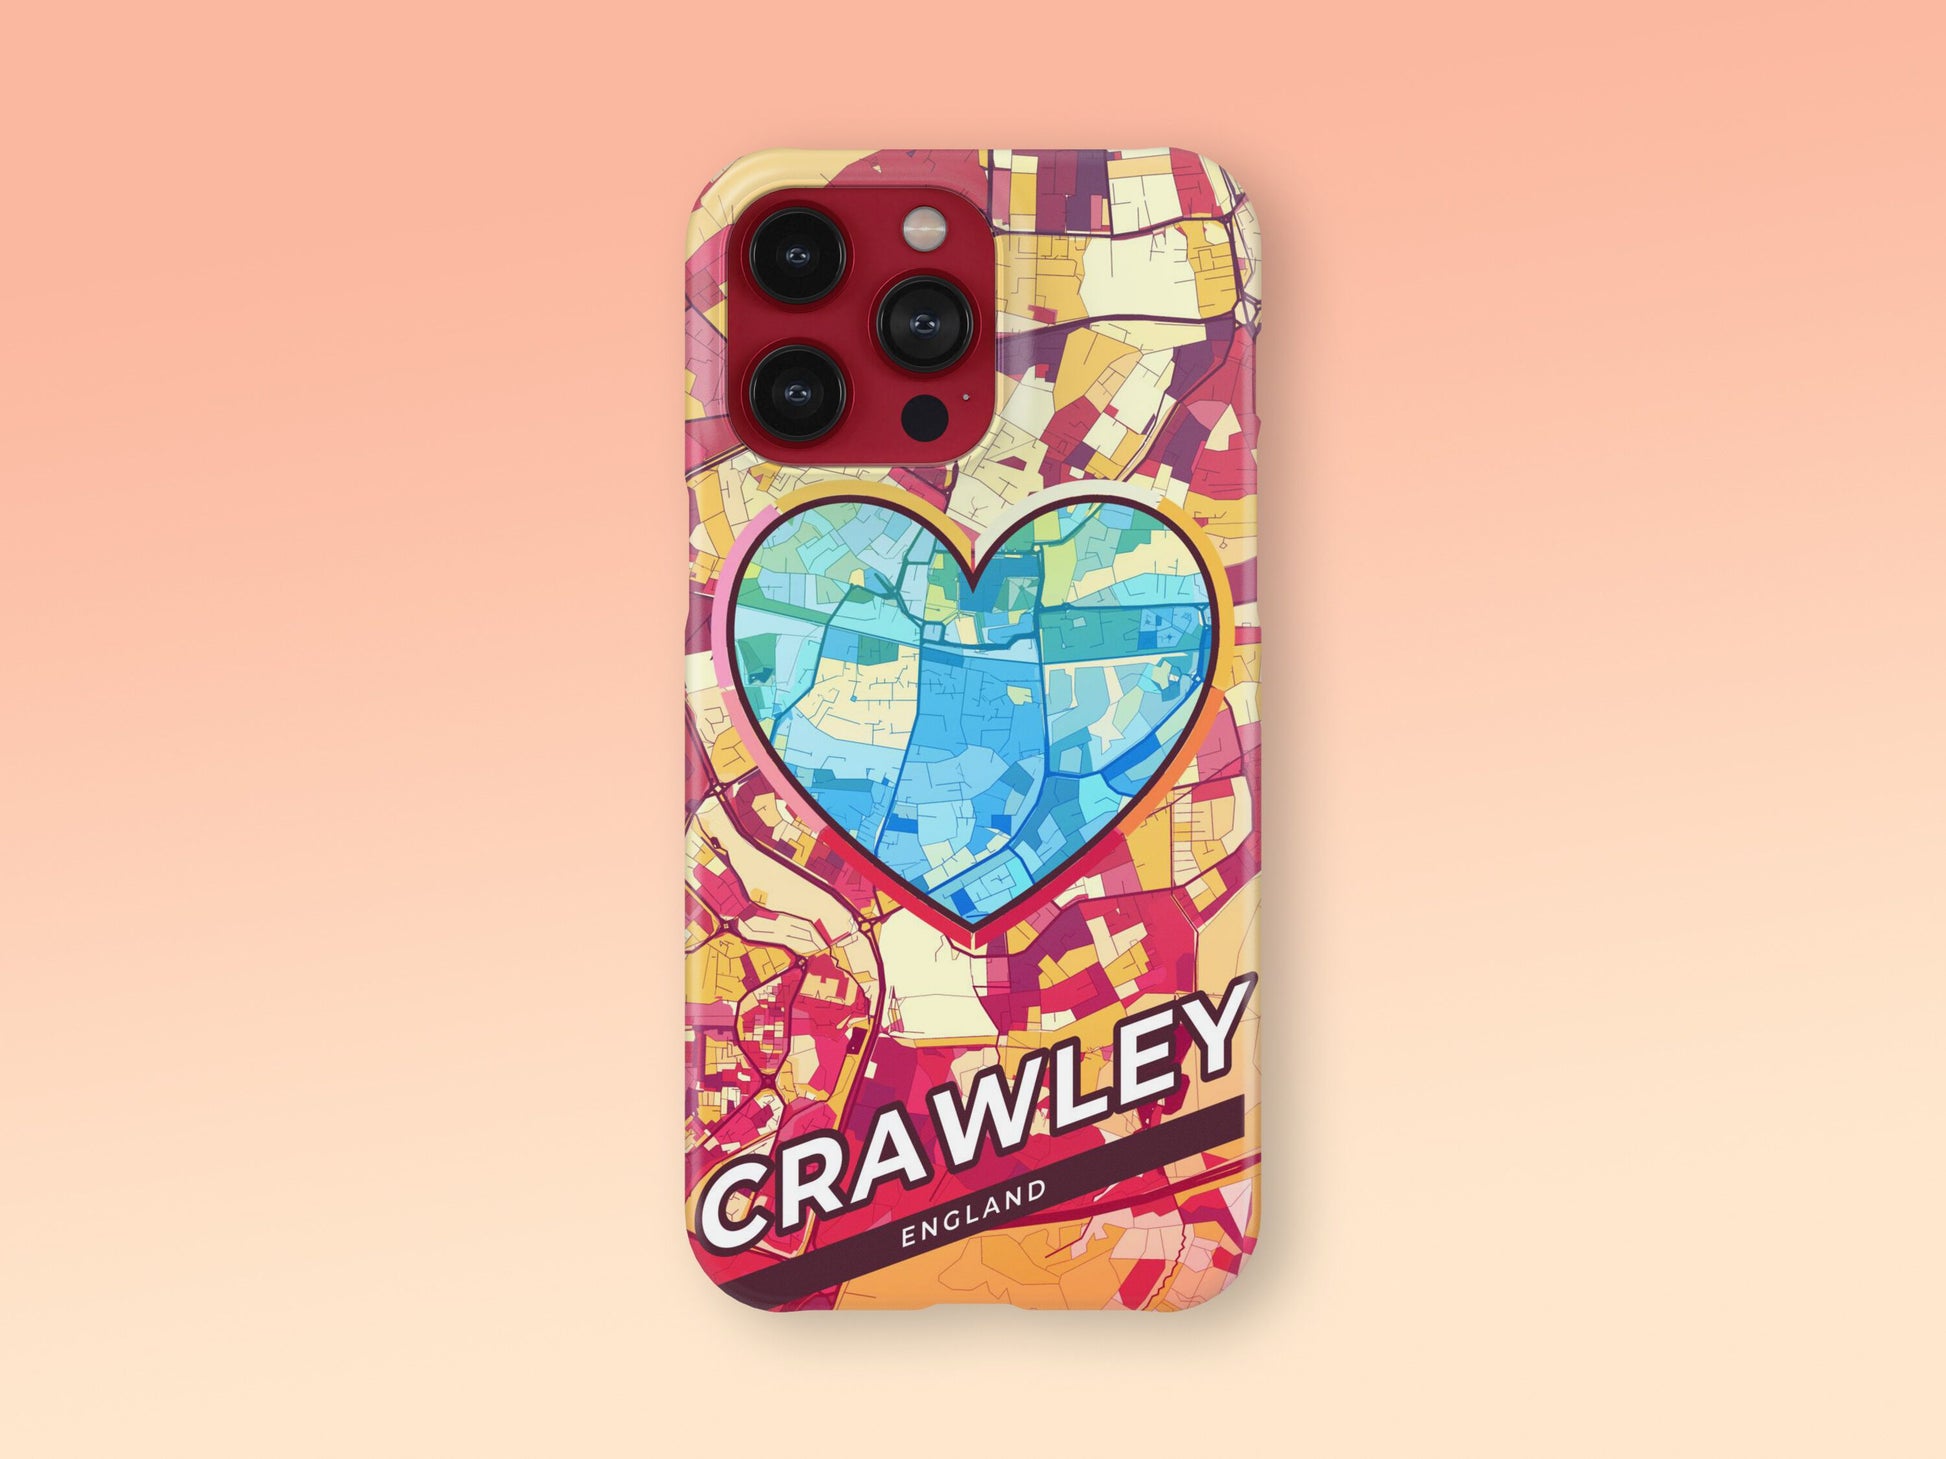 Crawley England slim phone case with colorful icon. Birthday, wedding or housewarming gift. Couple match cases. 2